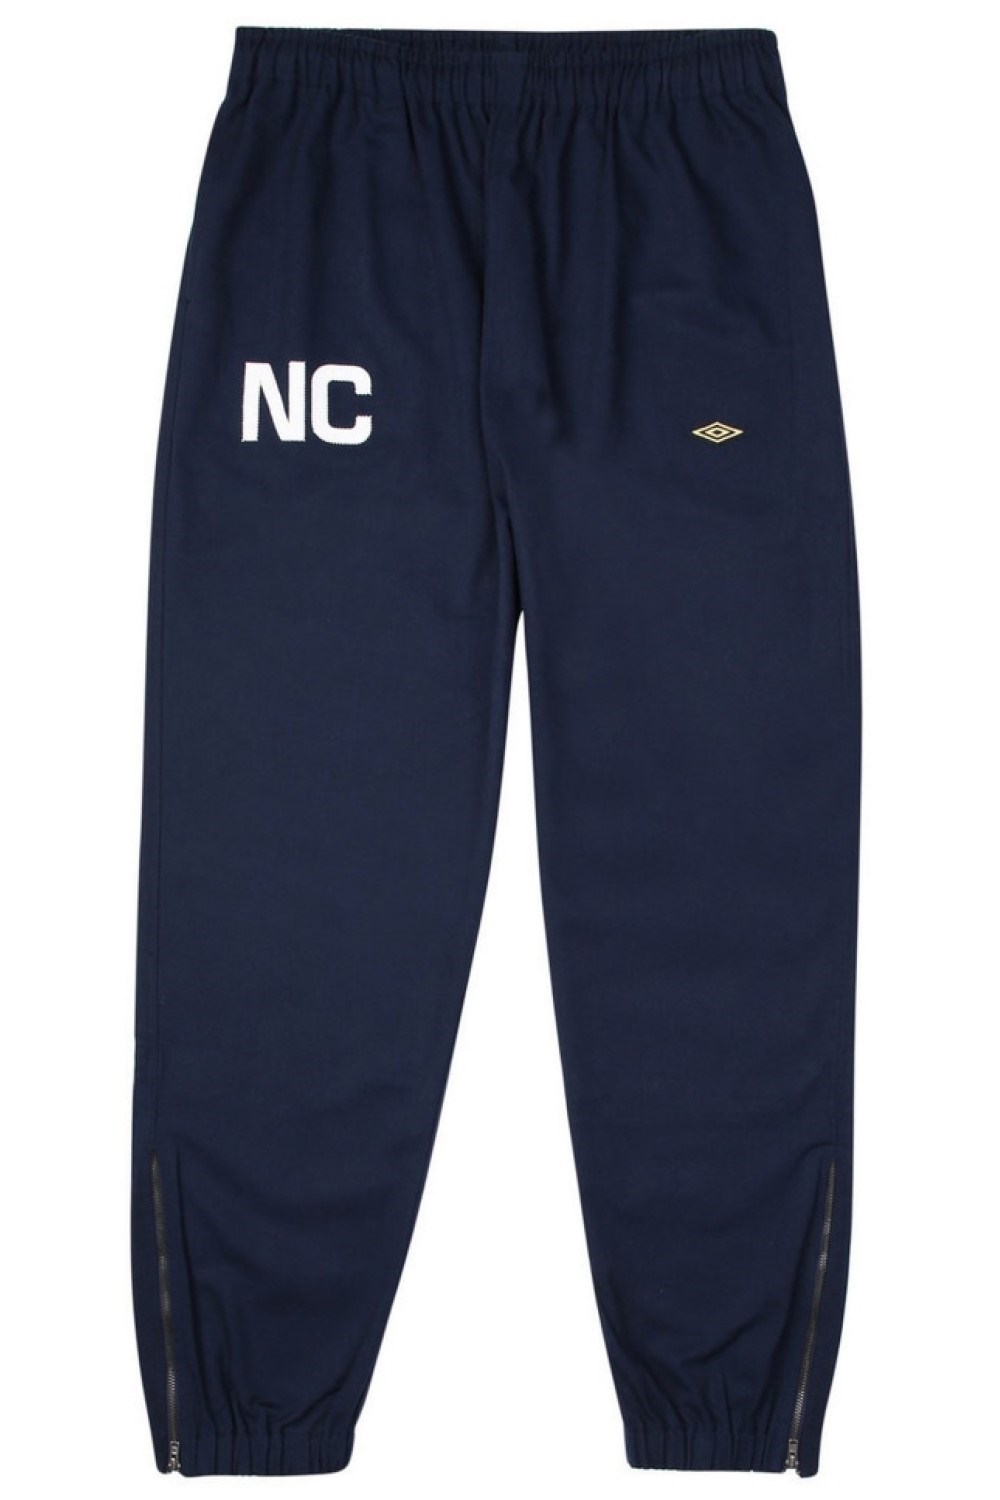 Nigel Cabourn Mens Training Trousers -